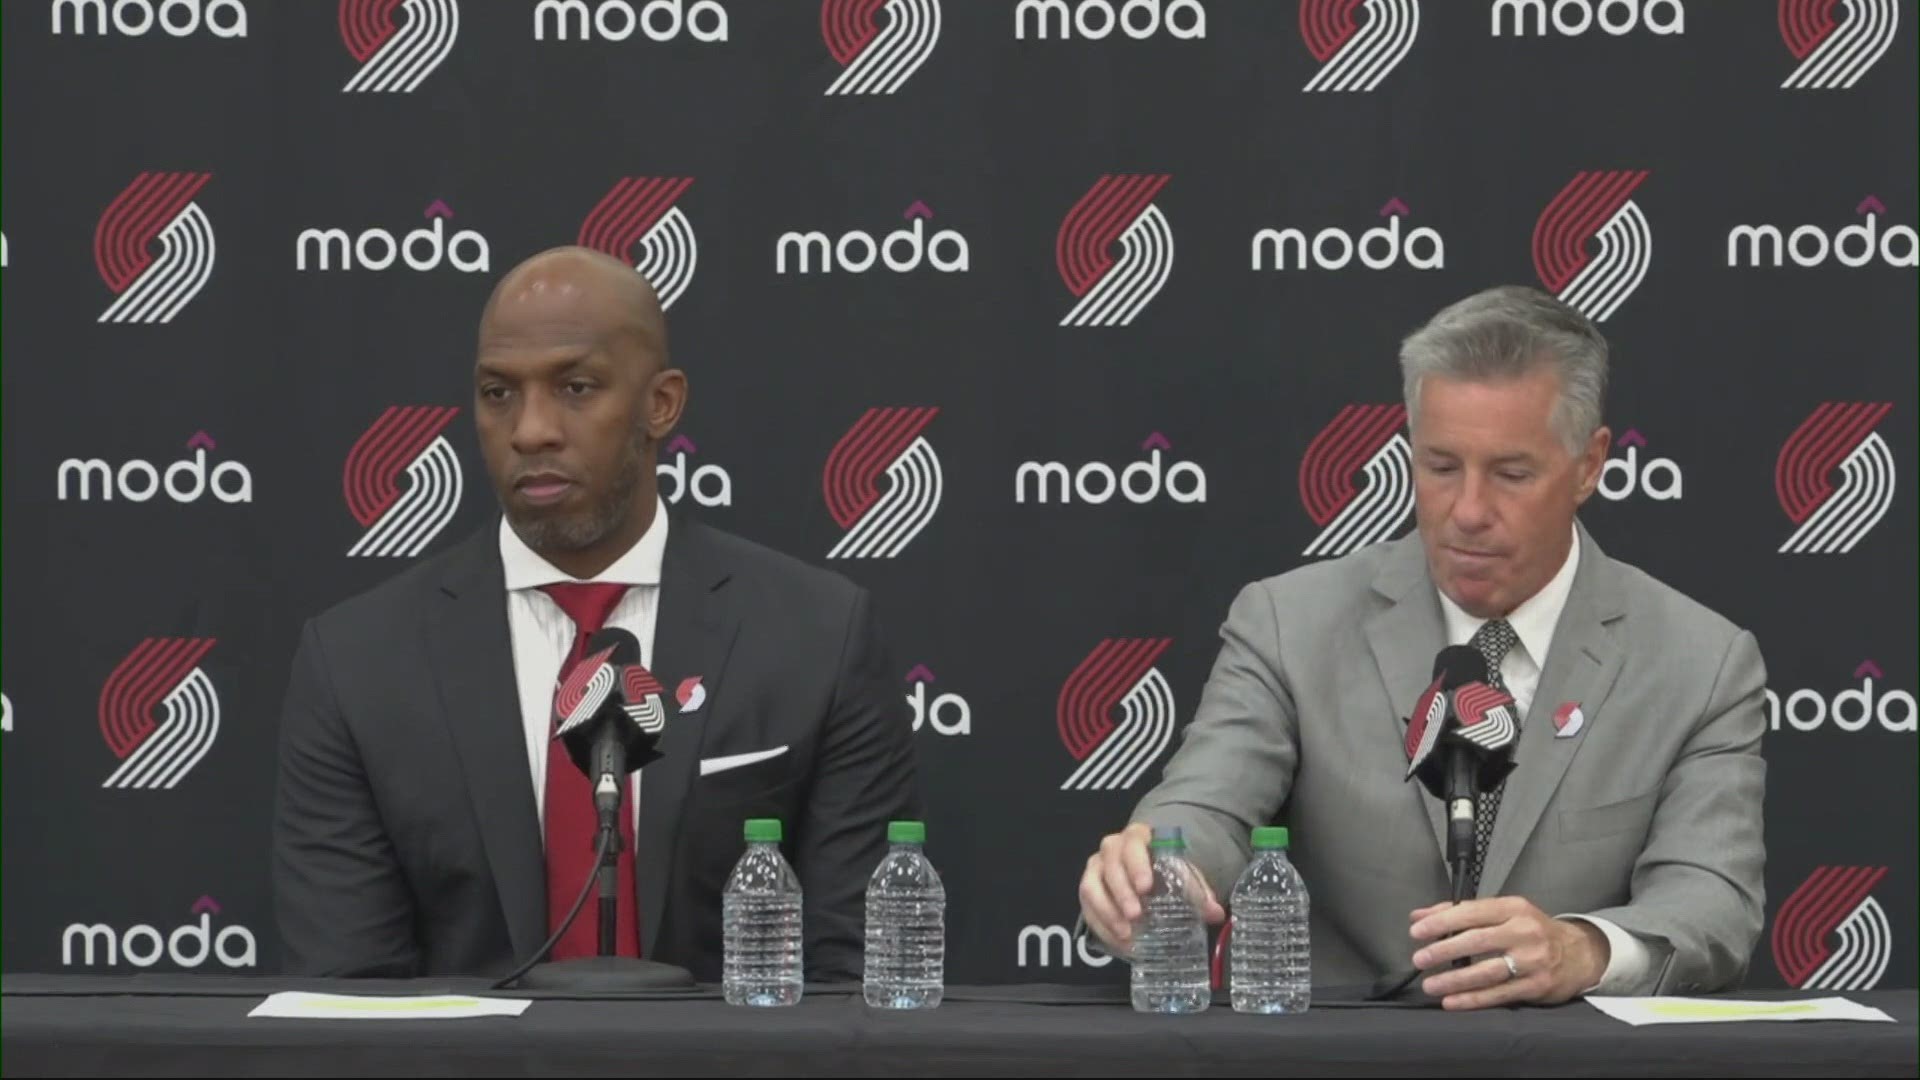 The Blazers doubled down on their hire of Billups despite backlash from a 1997 rape allegation. Advocate and sexual assault survivor Brenda Tracy weighs in.